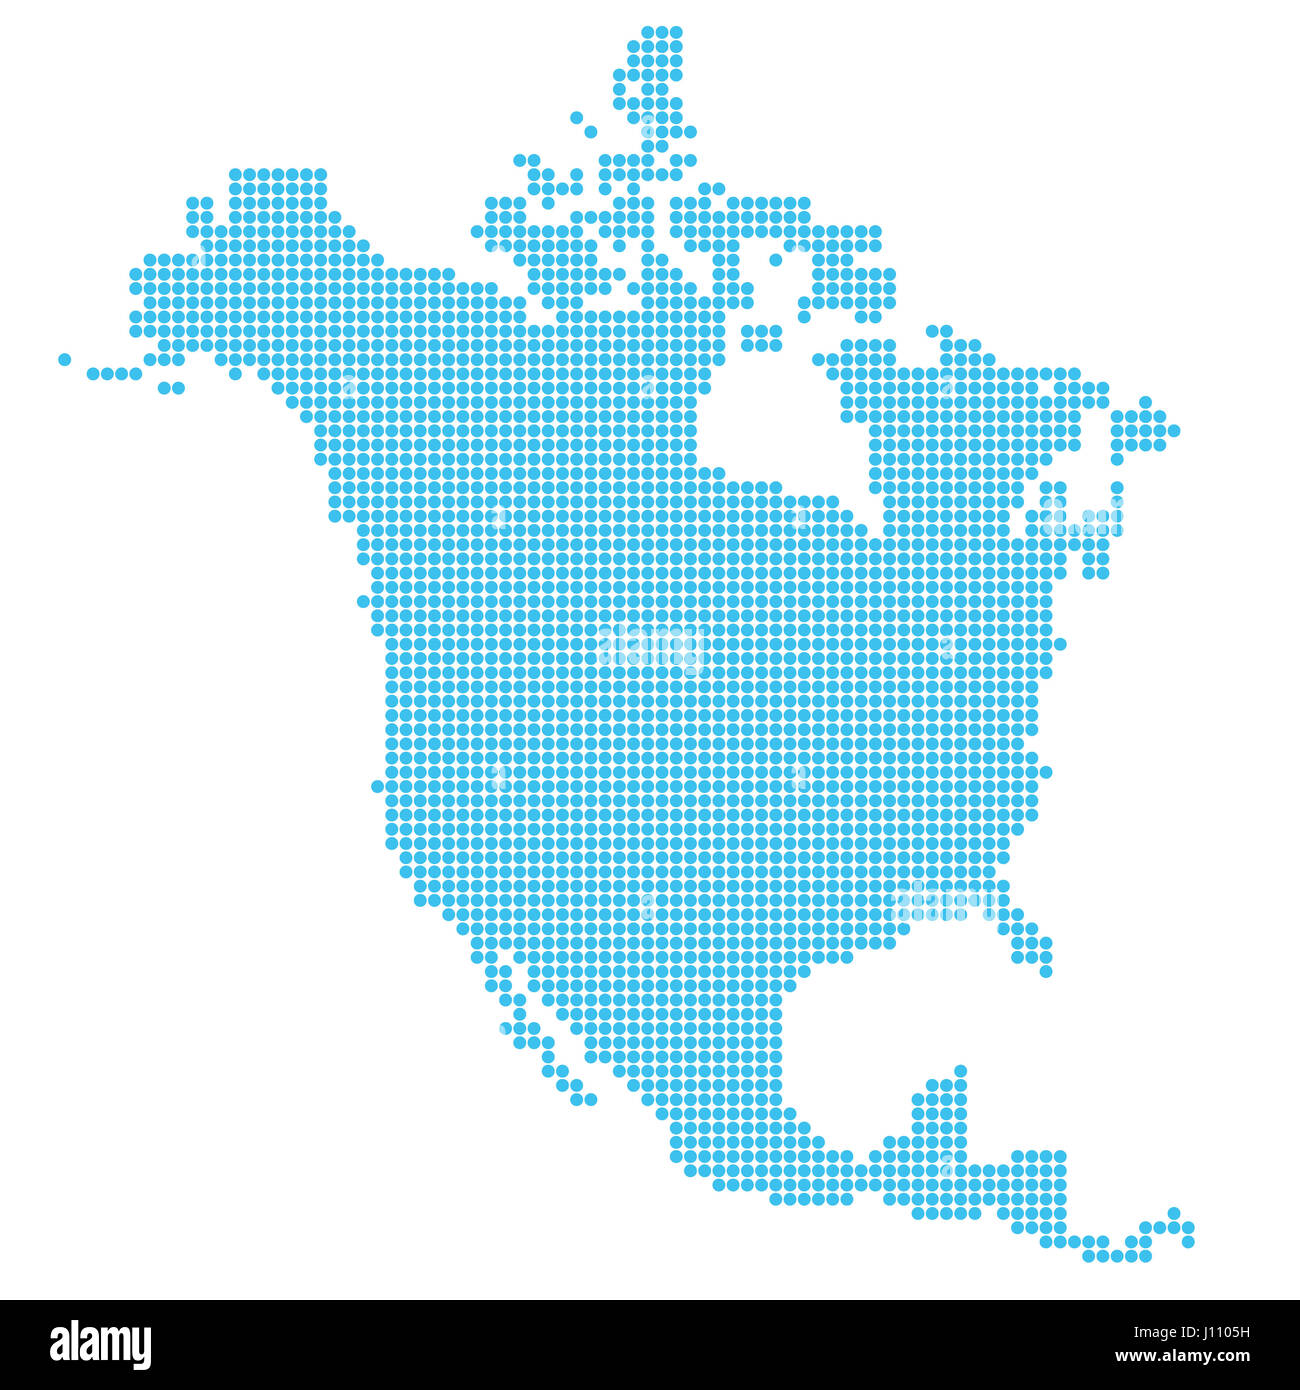 North America made of dots Stock Photo